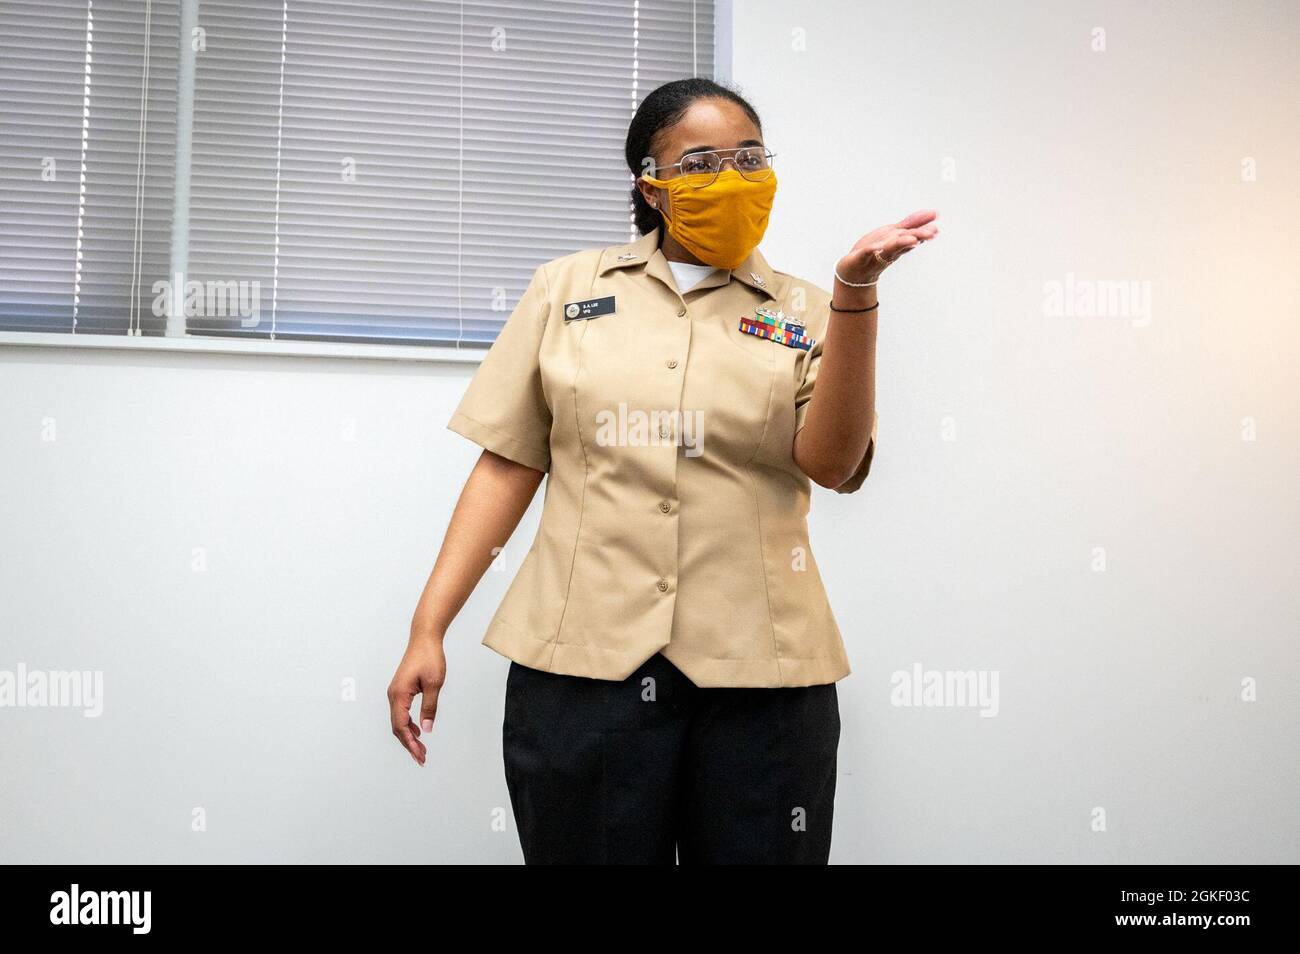 WASHINGTON, DC (April 2, 2021) – Culinary Specialist 2nd Class Sheniqua Lee addresses her colleagues and friends during her reenlistment ceremony held onboard Washington Navy Yard. Stock Photo